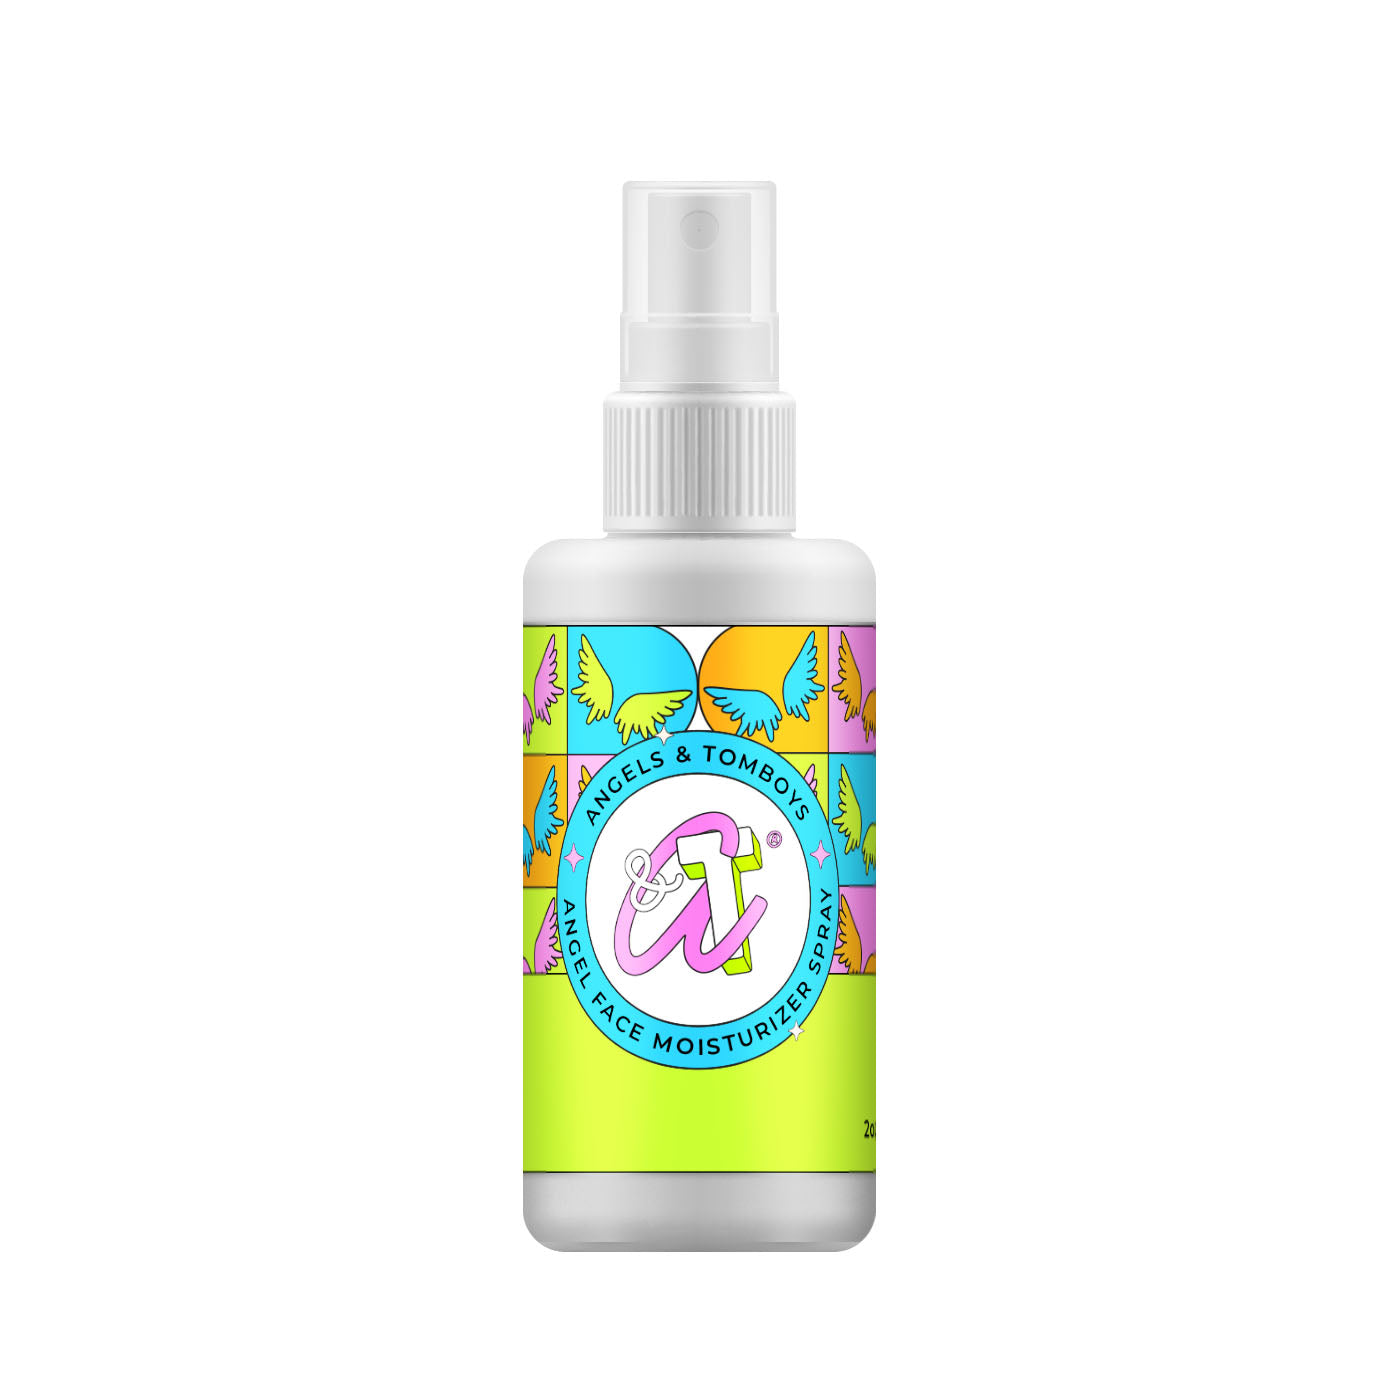 Angel Face Moisturizer Spray by Angels and Tomboys